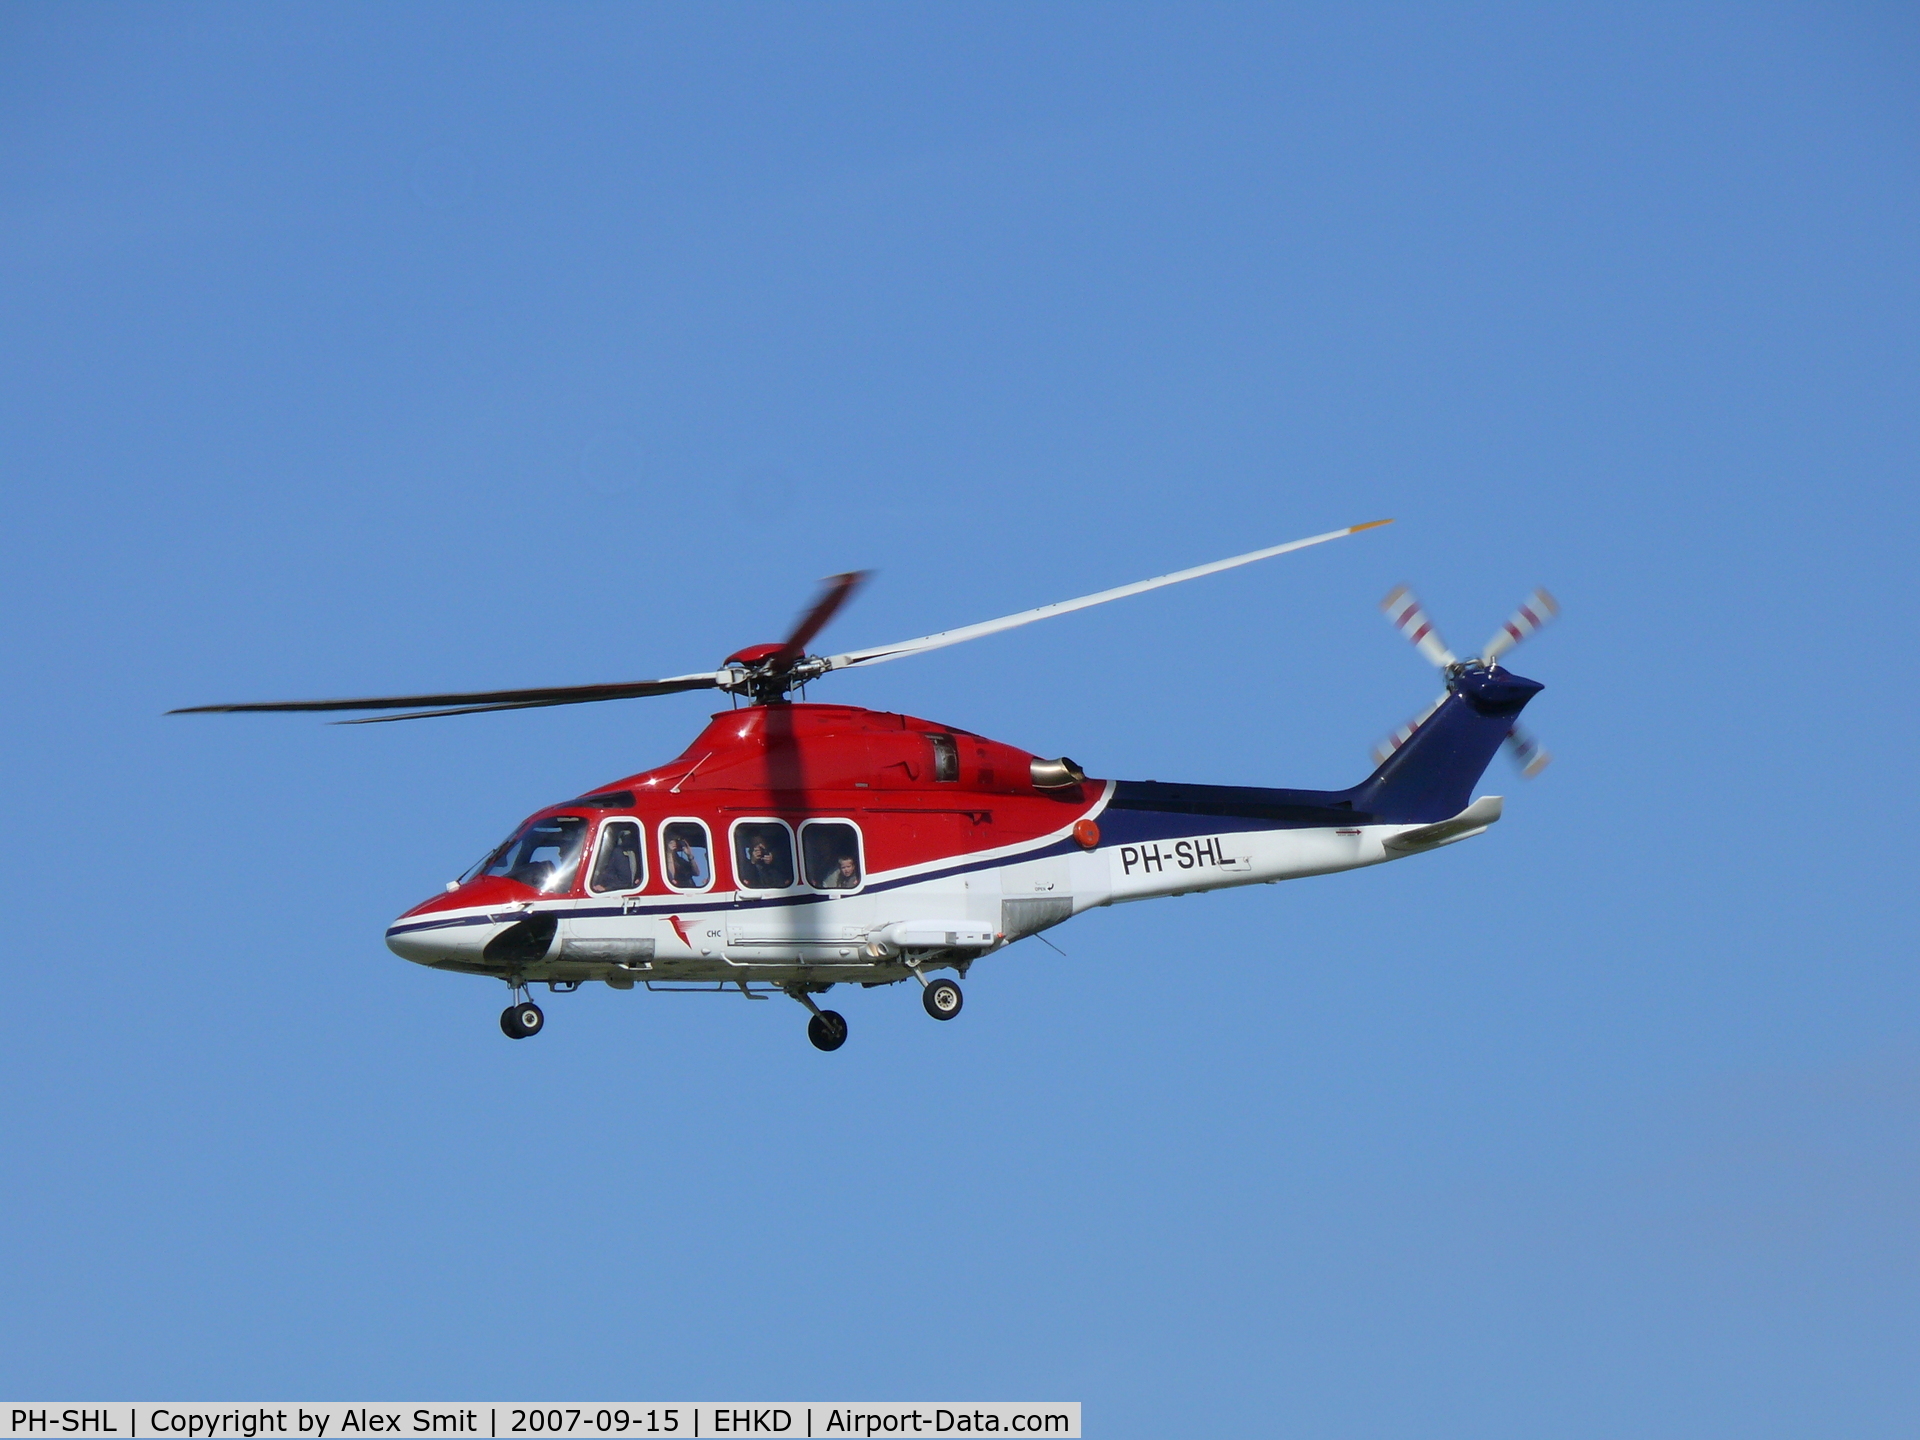 PH-SHL, 2006 Agusta AB-139 C/N 31041, Very nice looking helicopter